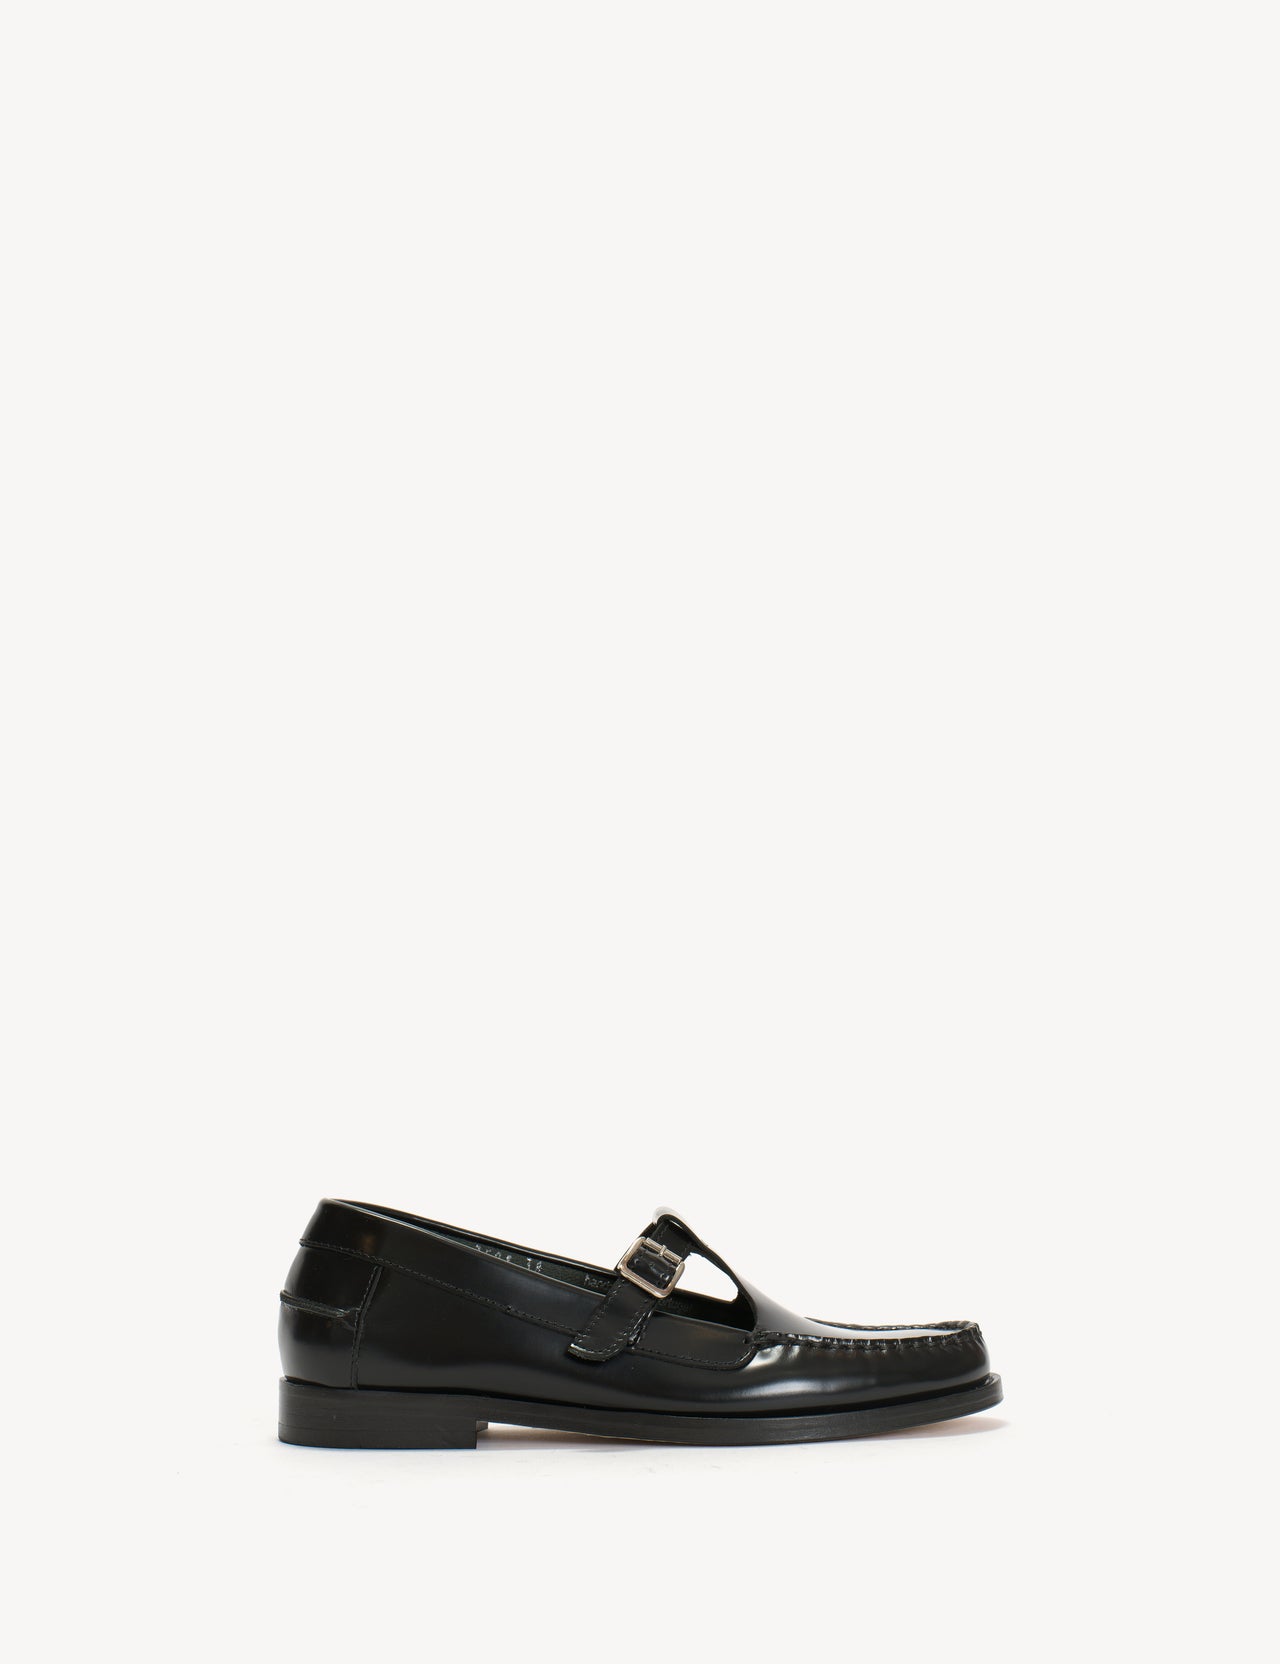 Moccasin T-Bar Loafer In Black Polido Leather